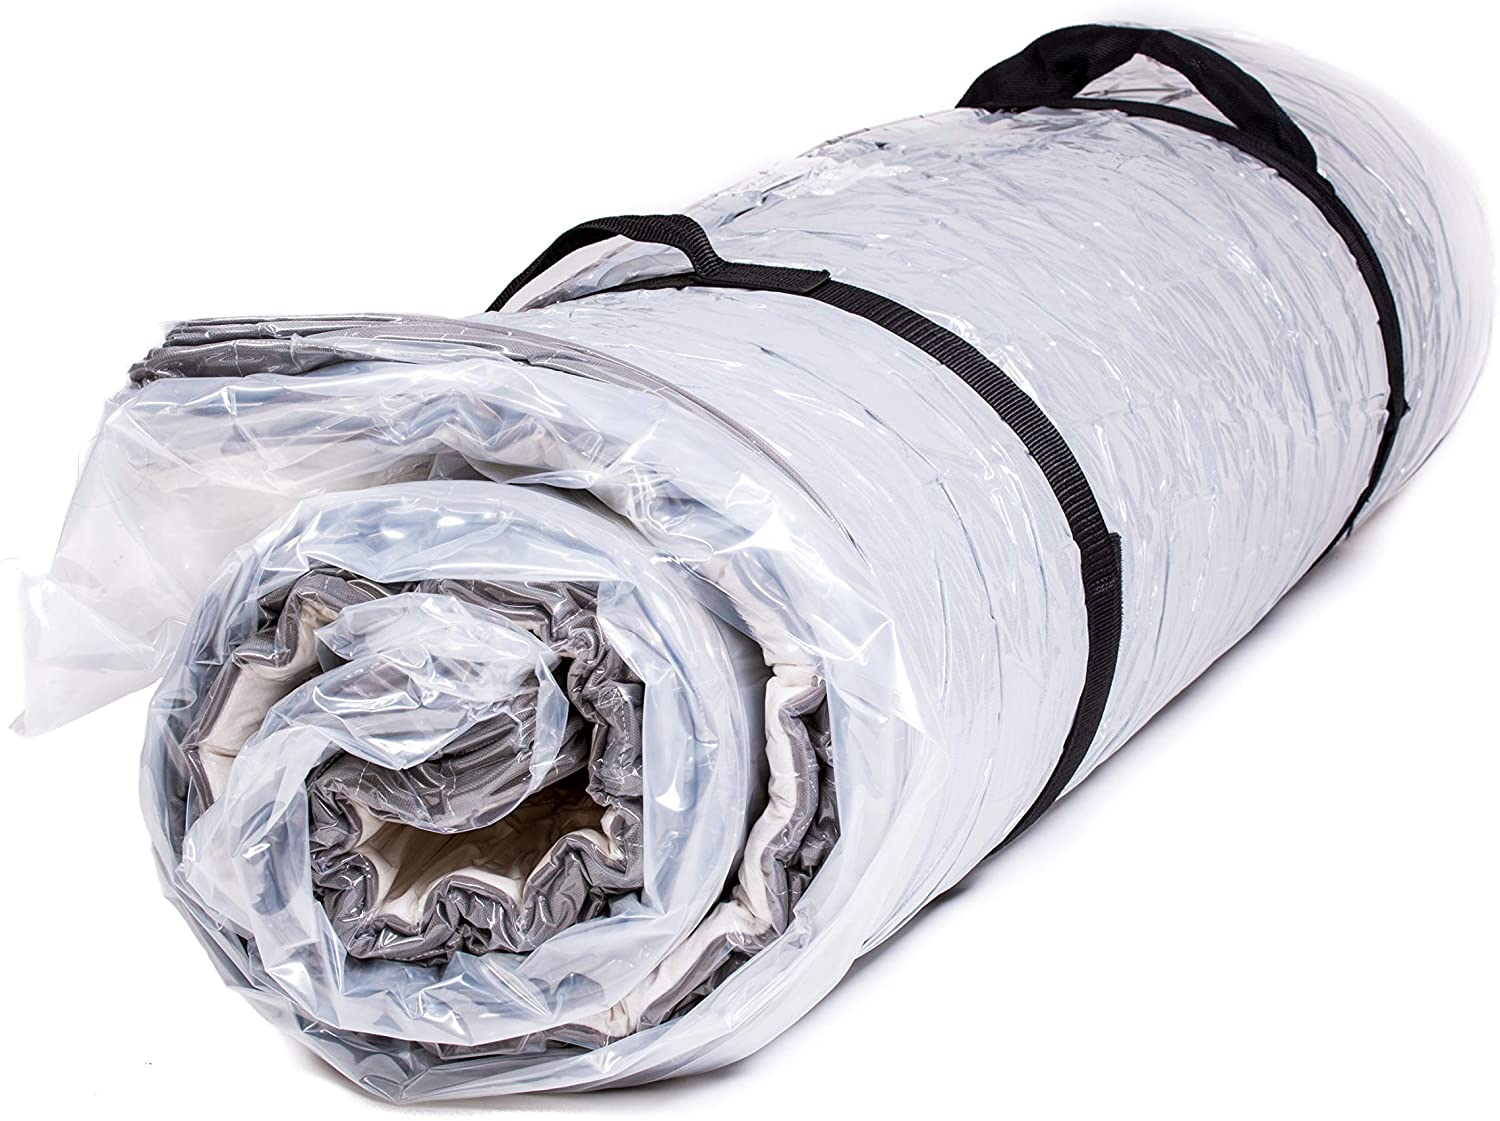 Use a vacuum bag to store a memory foam mattress topper and let it expand once you take it out